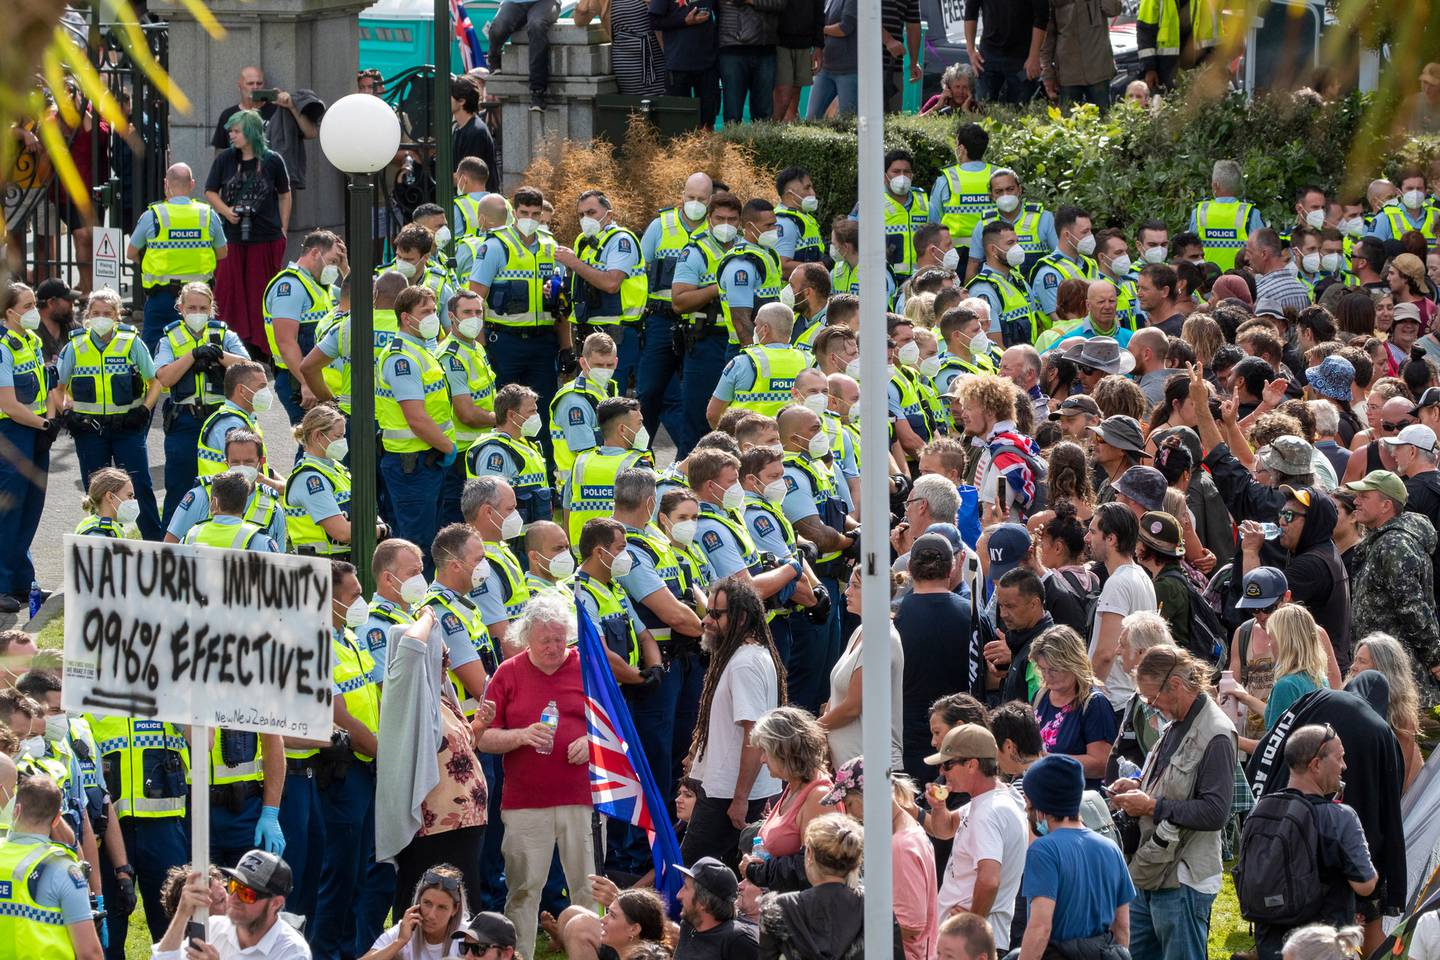 Protesters and police in a stand-off outside Parliament. Photo / Mark Mitchell